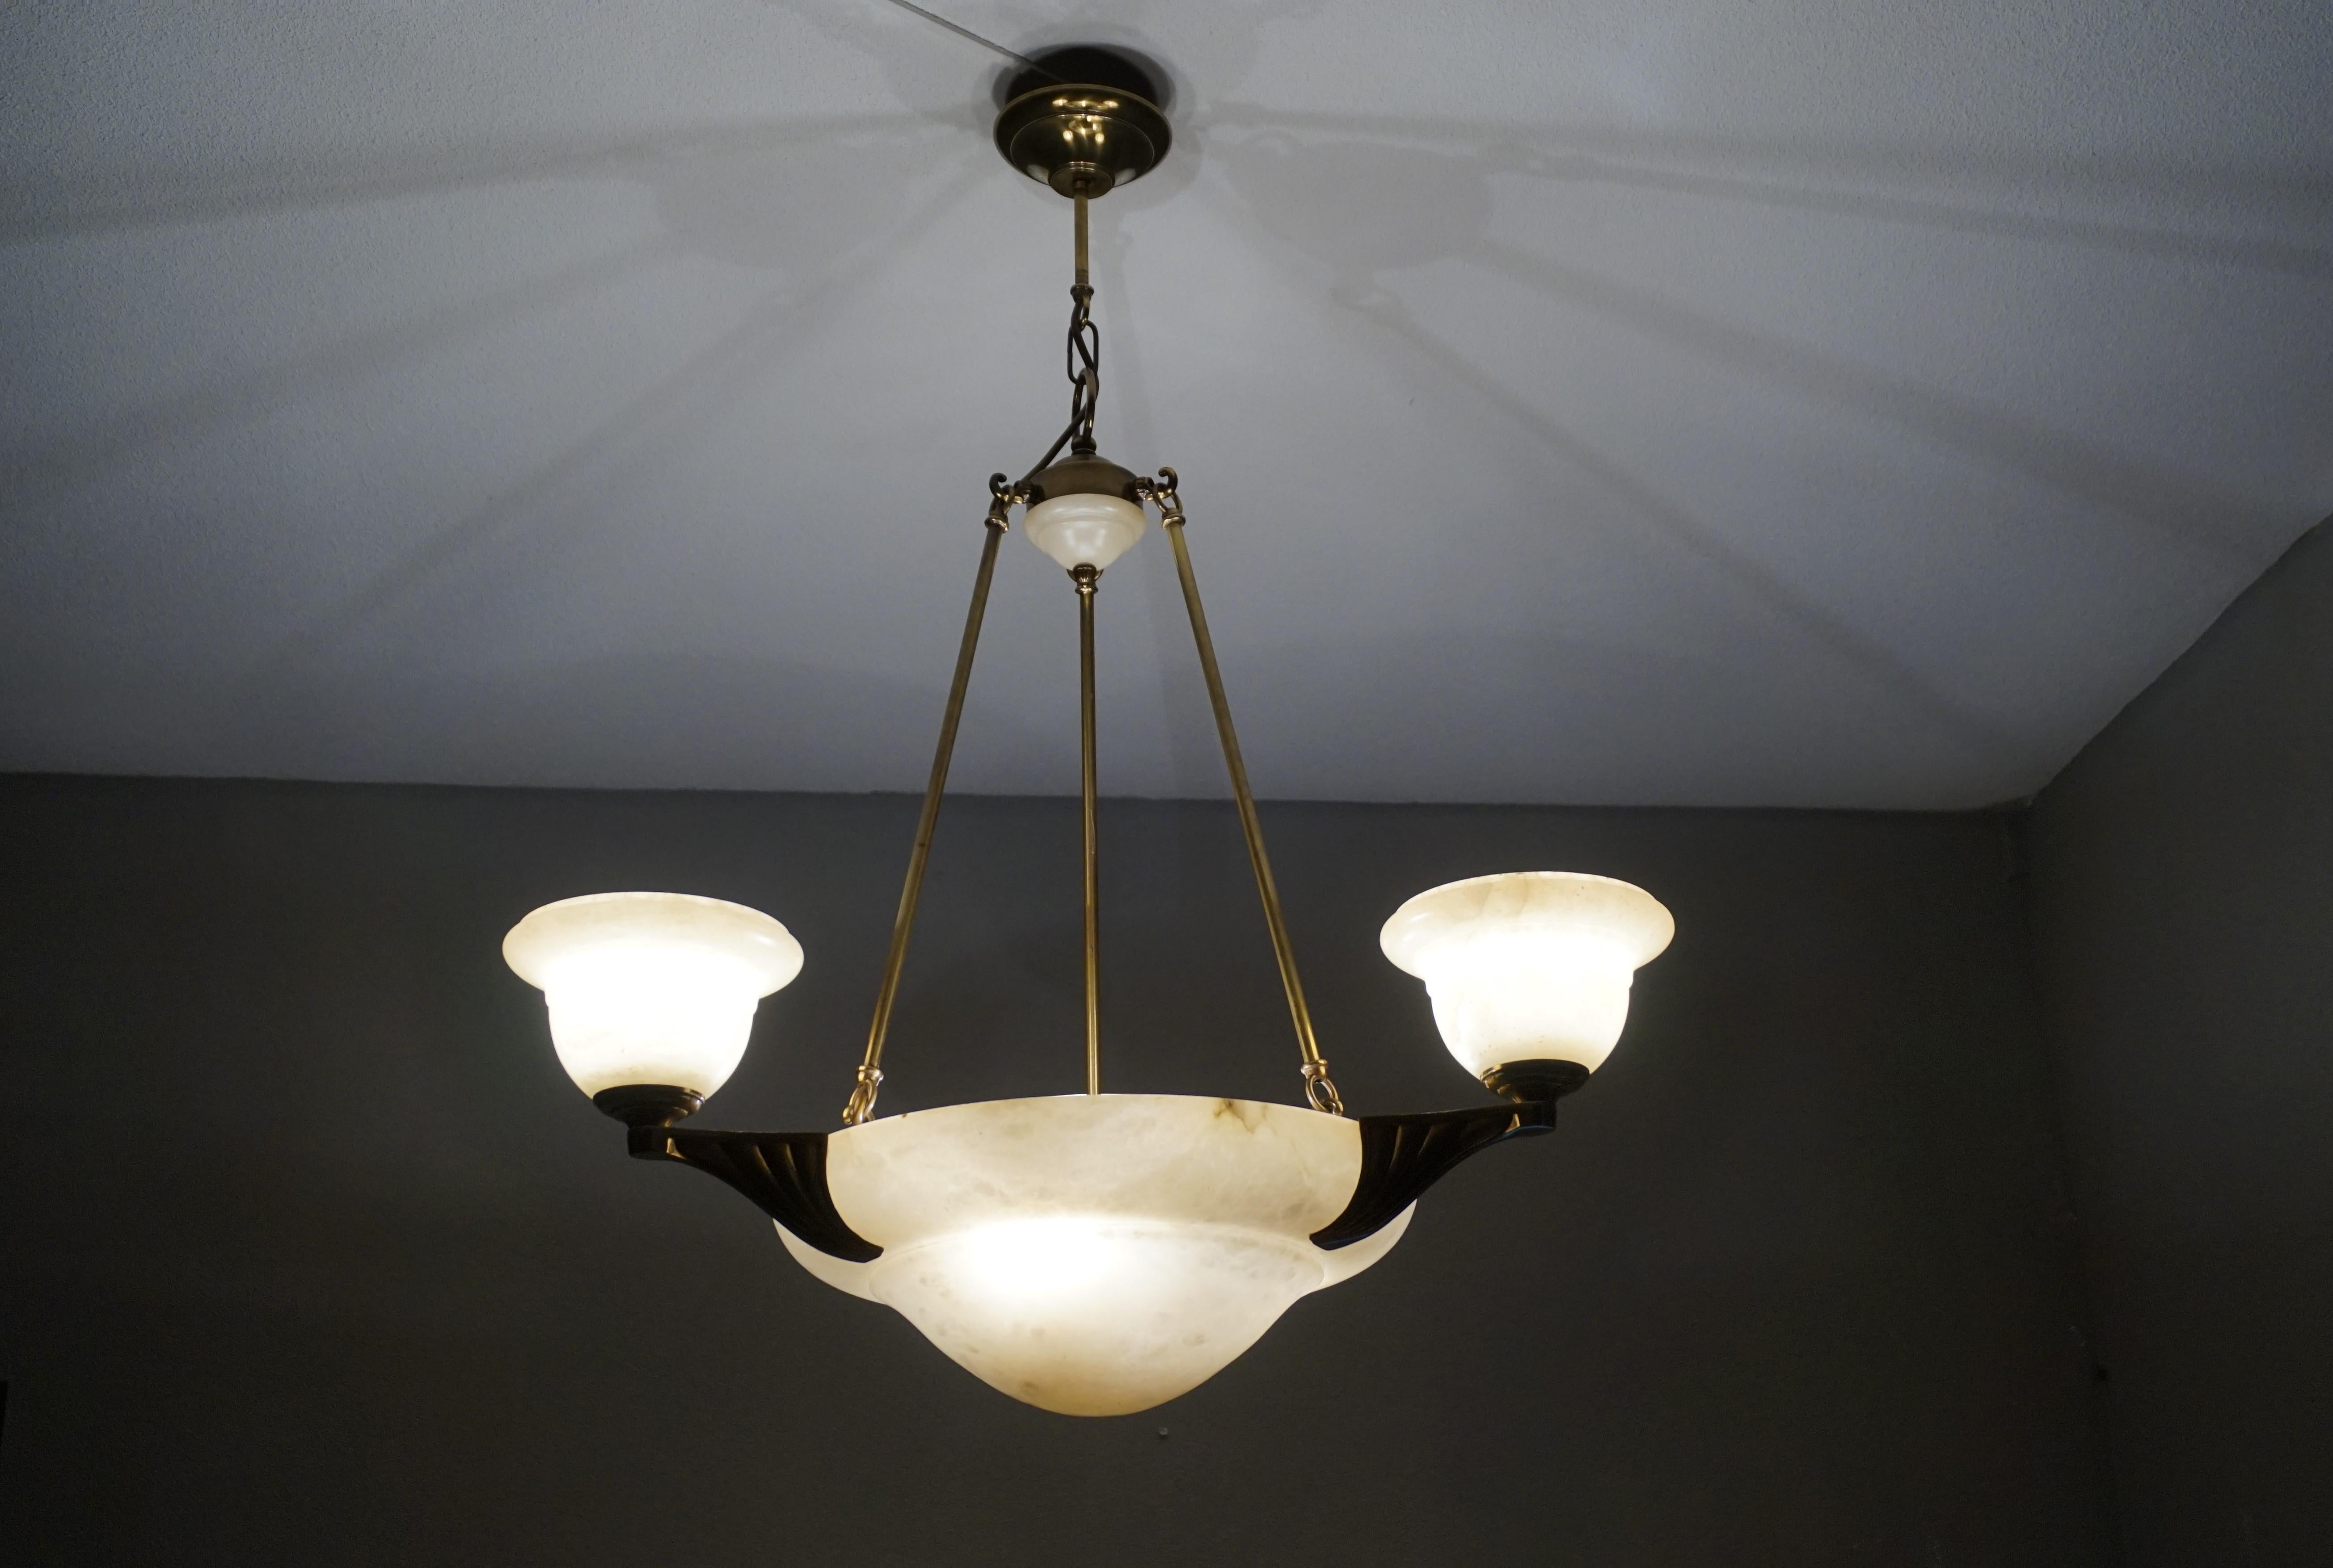 Excellent condition and rare design, 6-light chandelier.

If you like Arts and Crafts light fixtures, but you prefer to have them shiny like new, then this 1970s alabaster and bronze chandelier could be perfect for you. The combination of the creamy